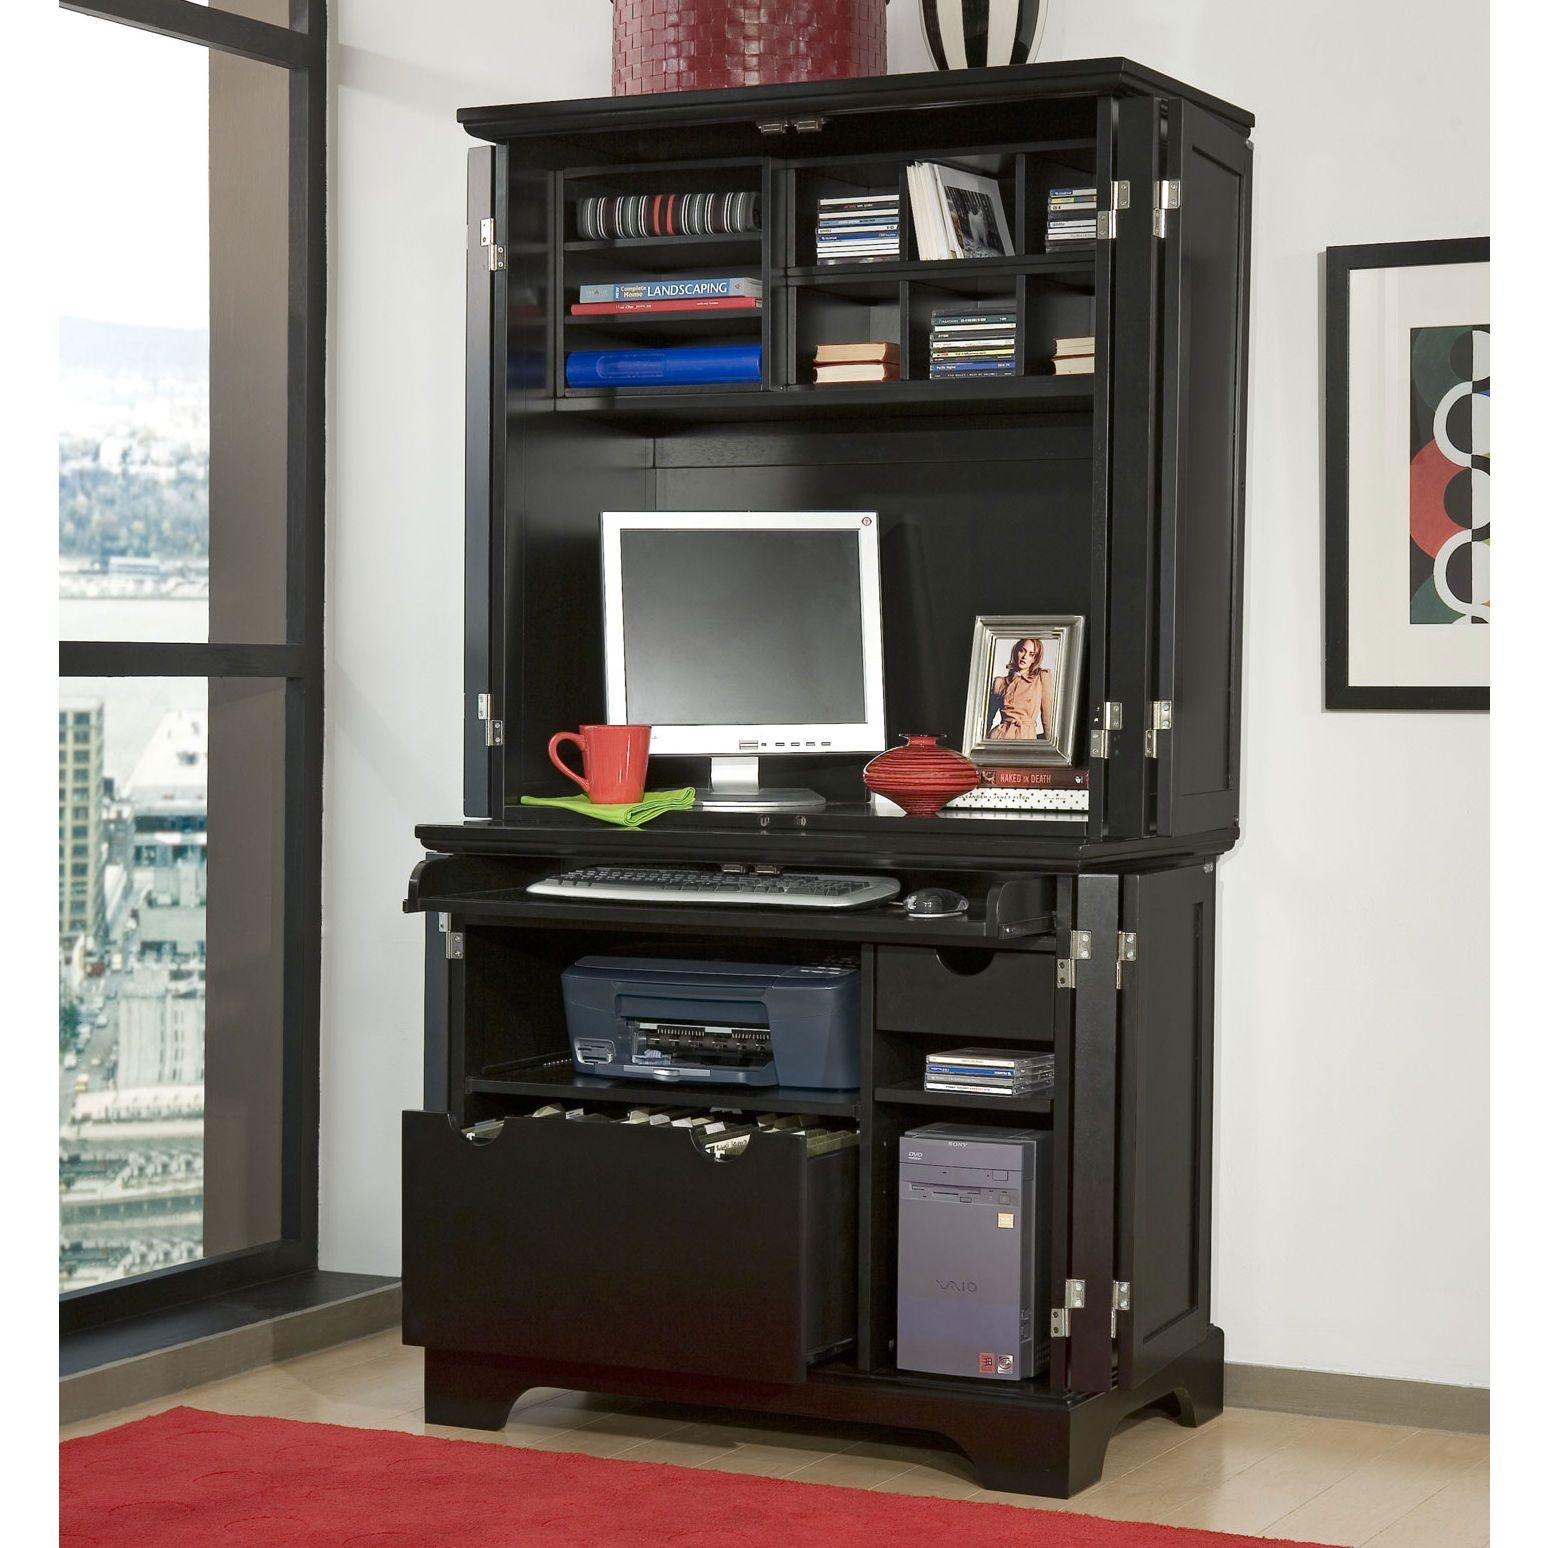 Furniture bedford cabinet hutch in ebony by home styles